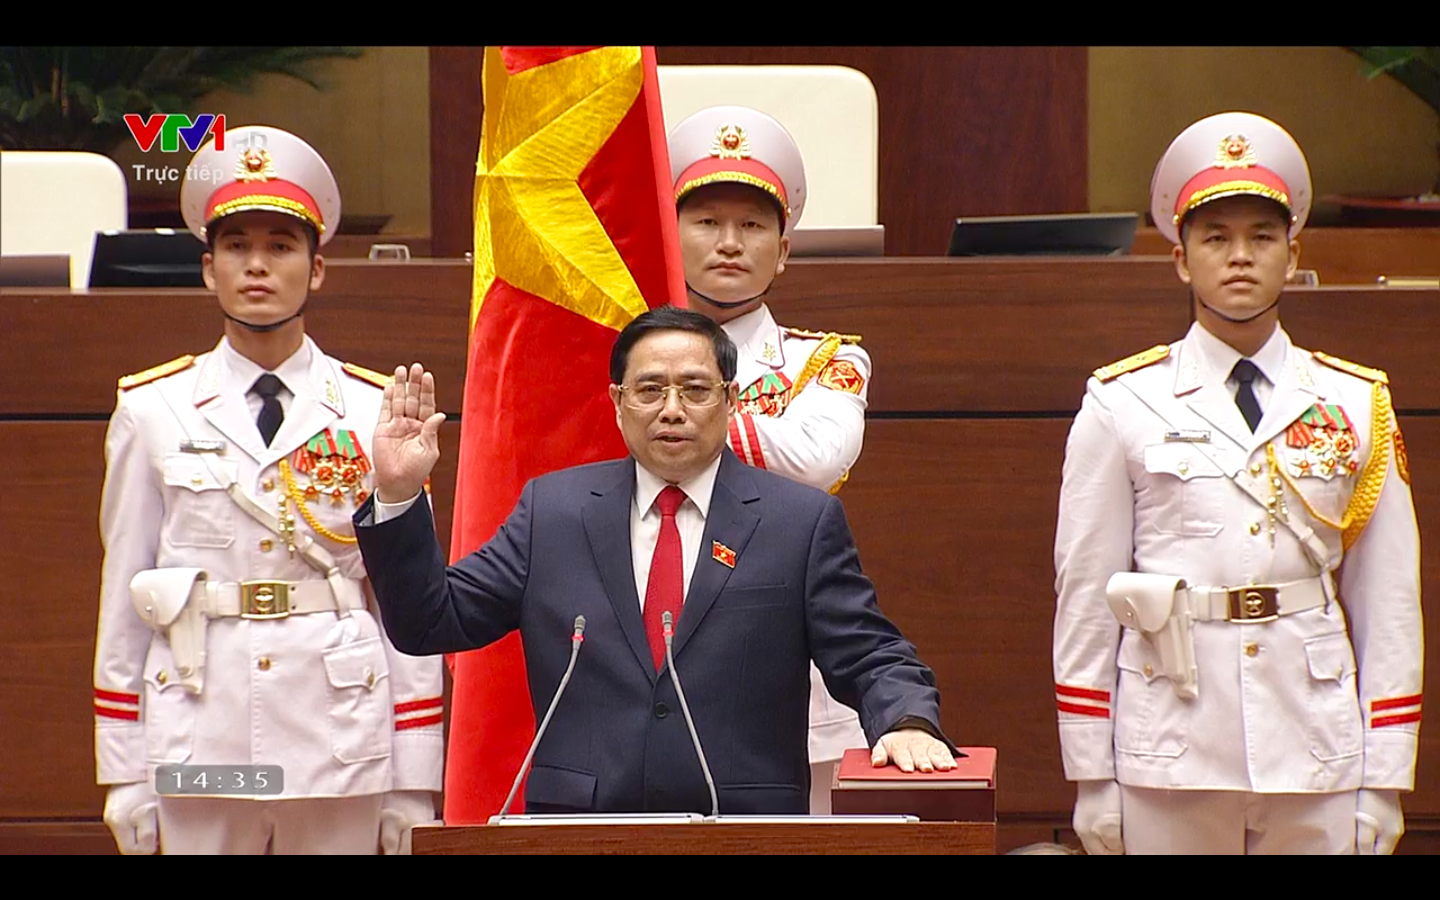 Pham Minh Chinh re-elected as Vietnamese prime minister for 2021-26